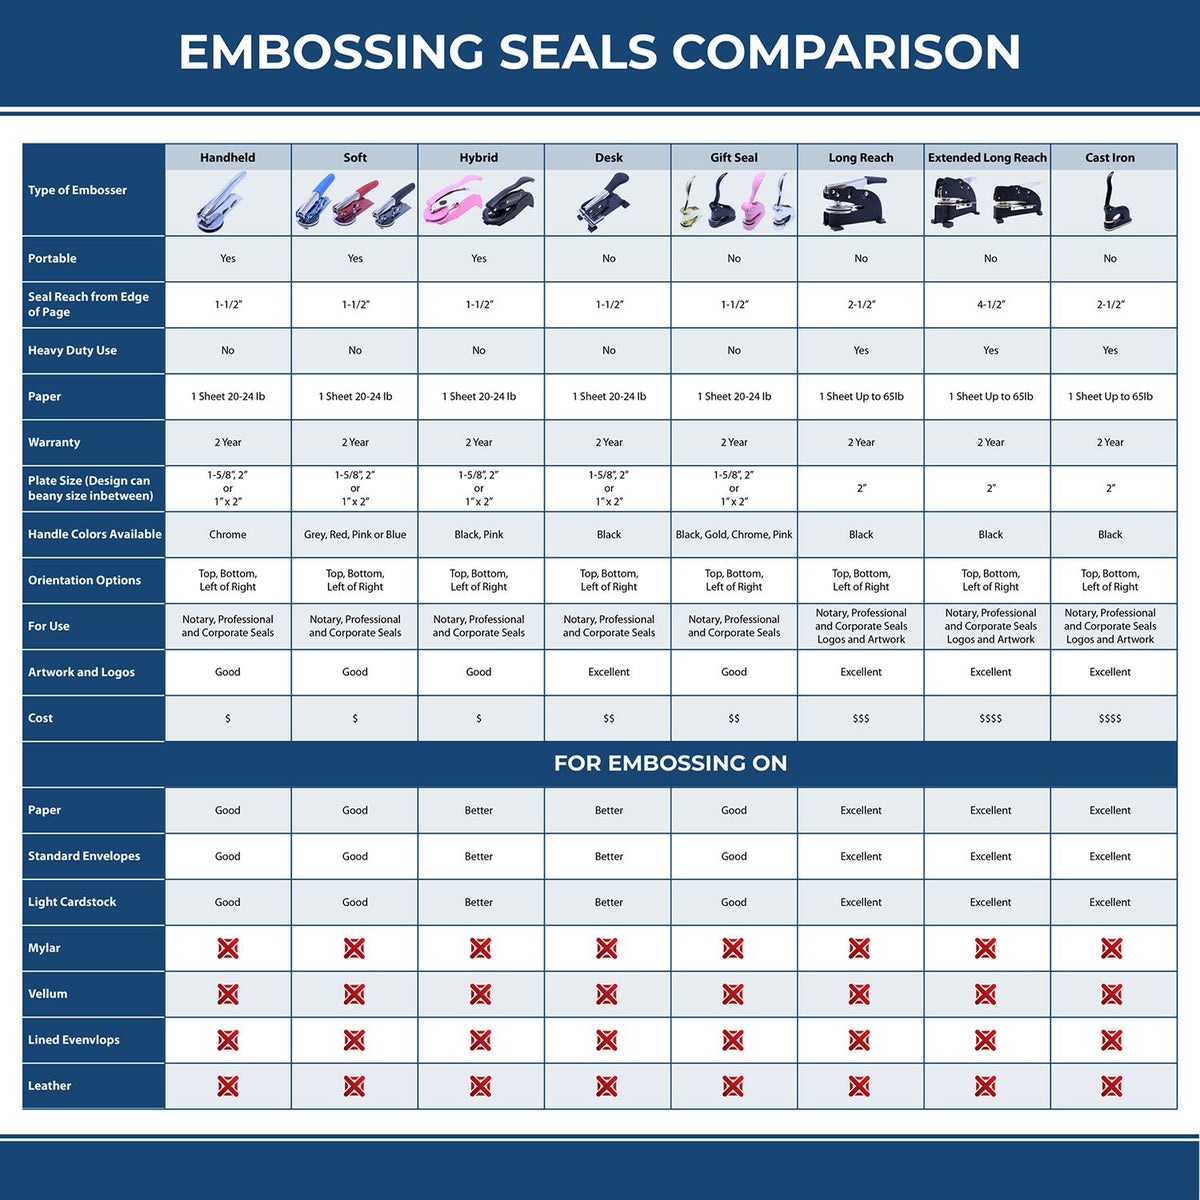 A comparison chart for the different types of mount models available for the Handheld Guam Architect Seal Embosser.